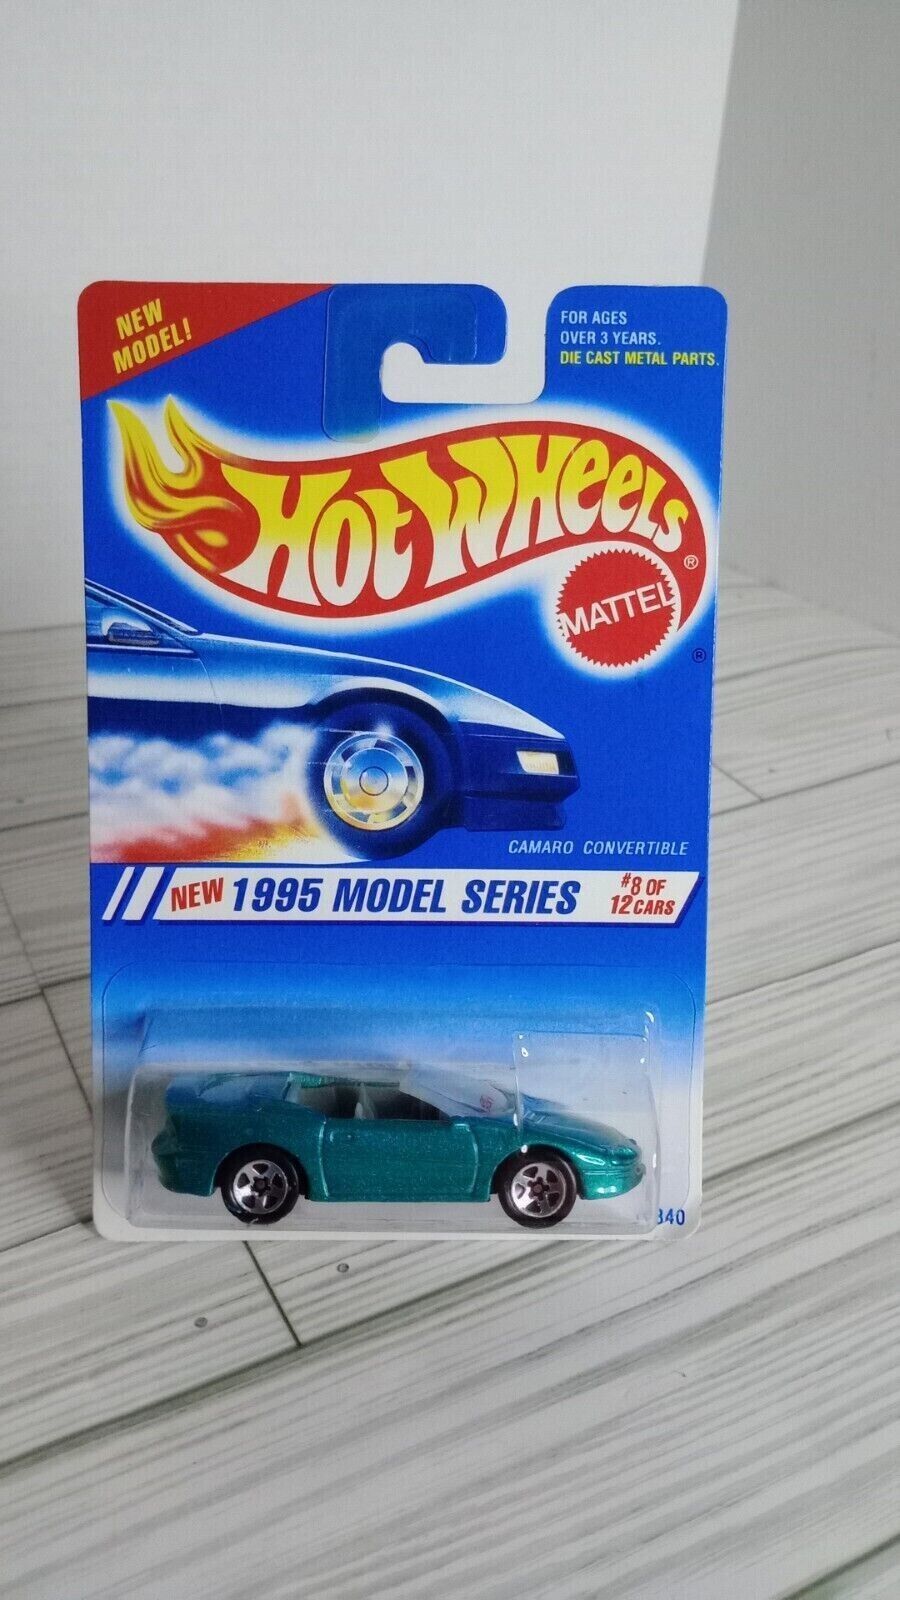 Primary image for Hot Wheels 1995 Camaro Convertible New Model Series #8 of 12 Collector #344